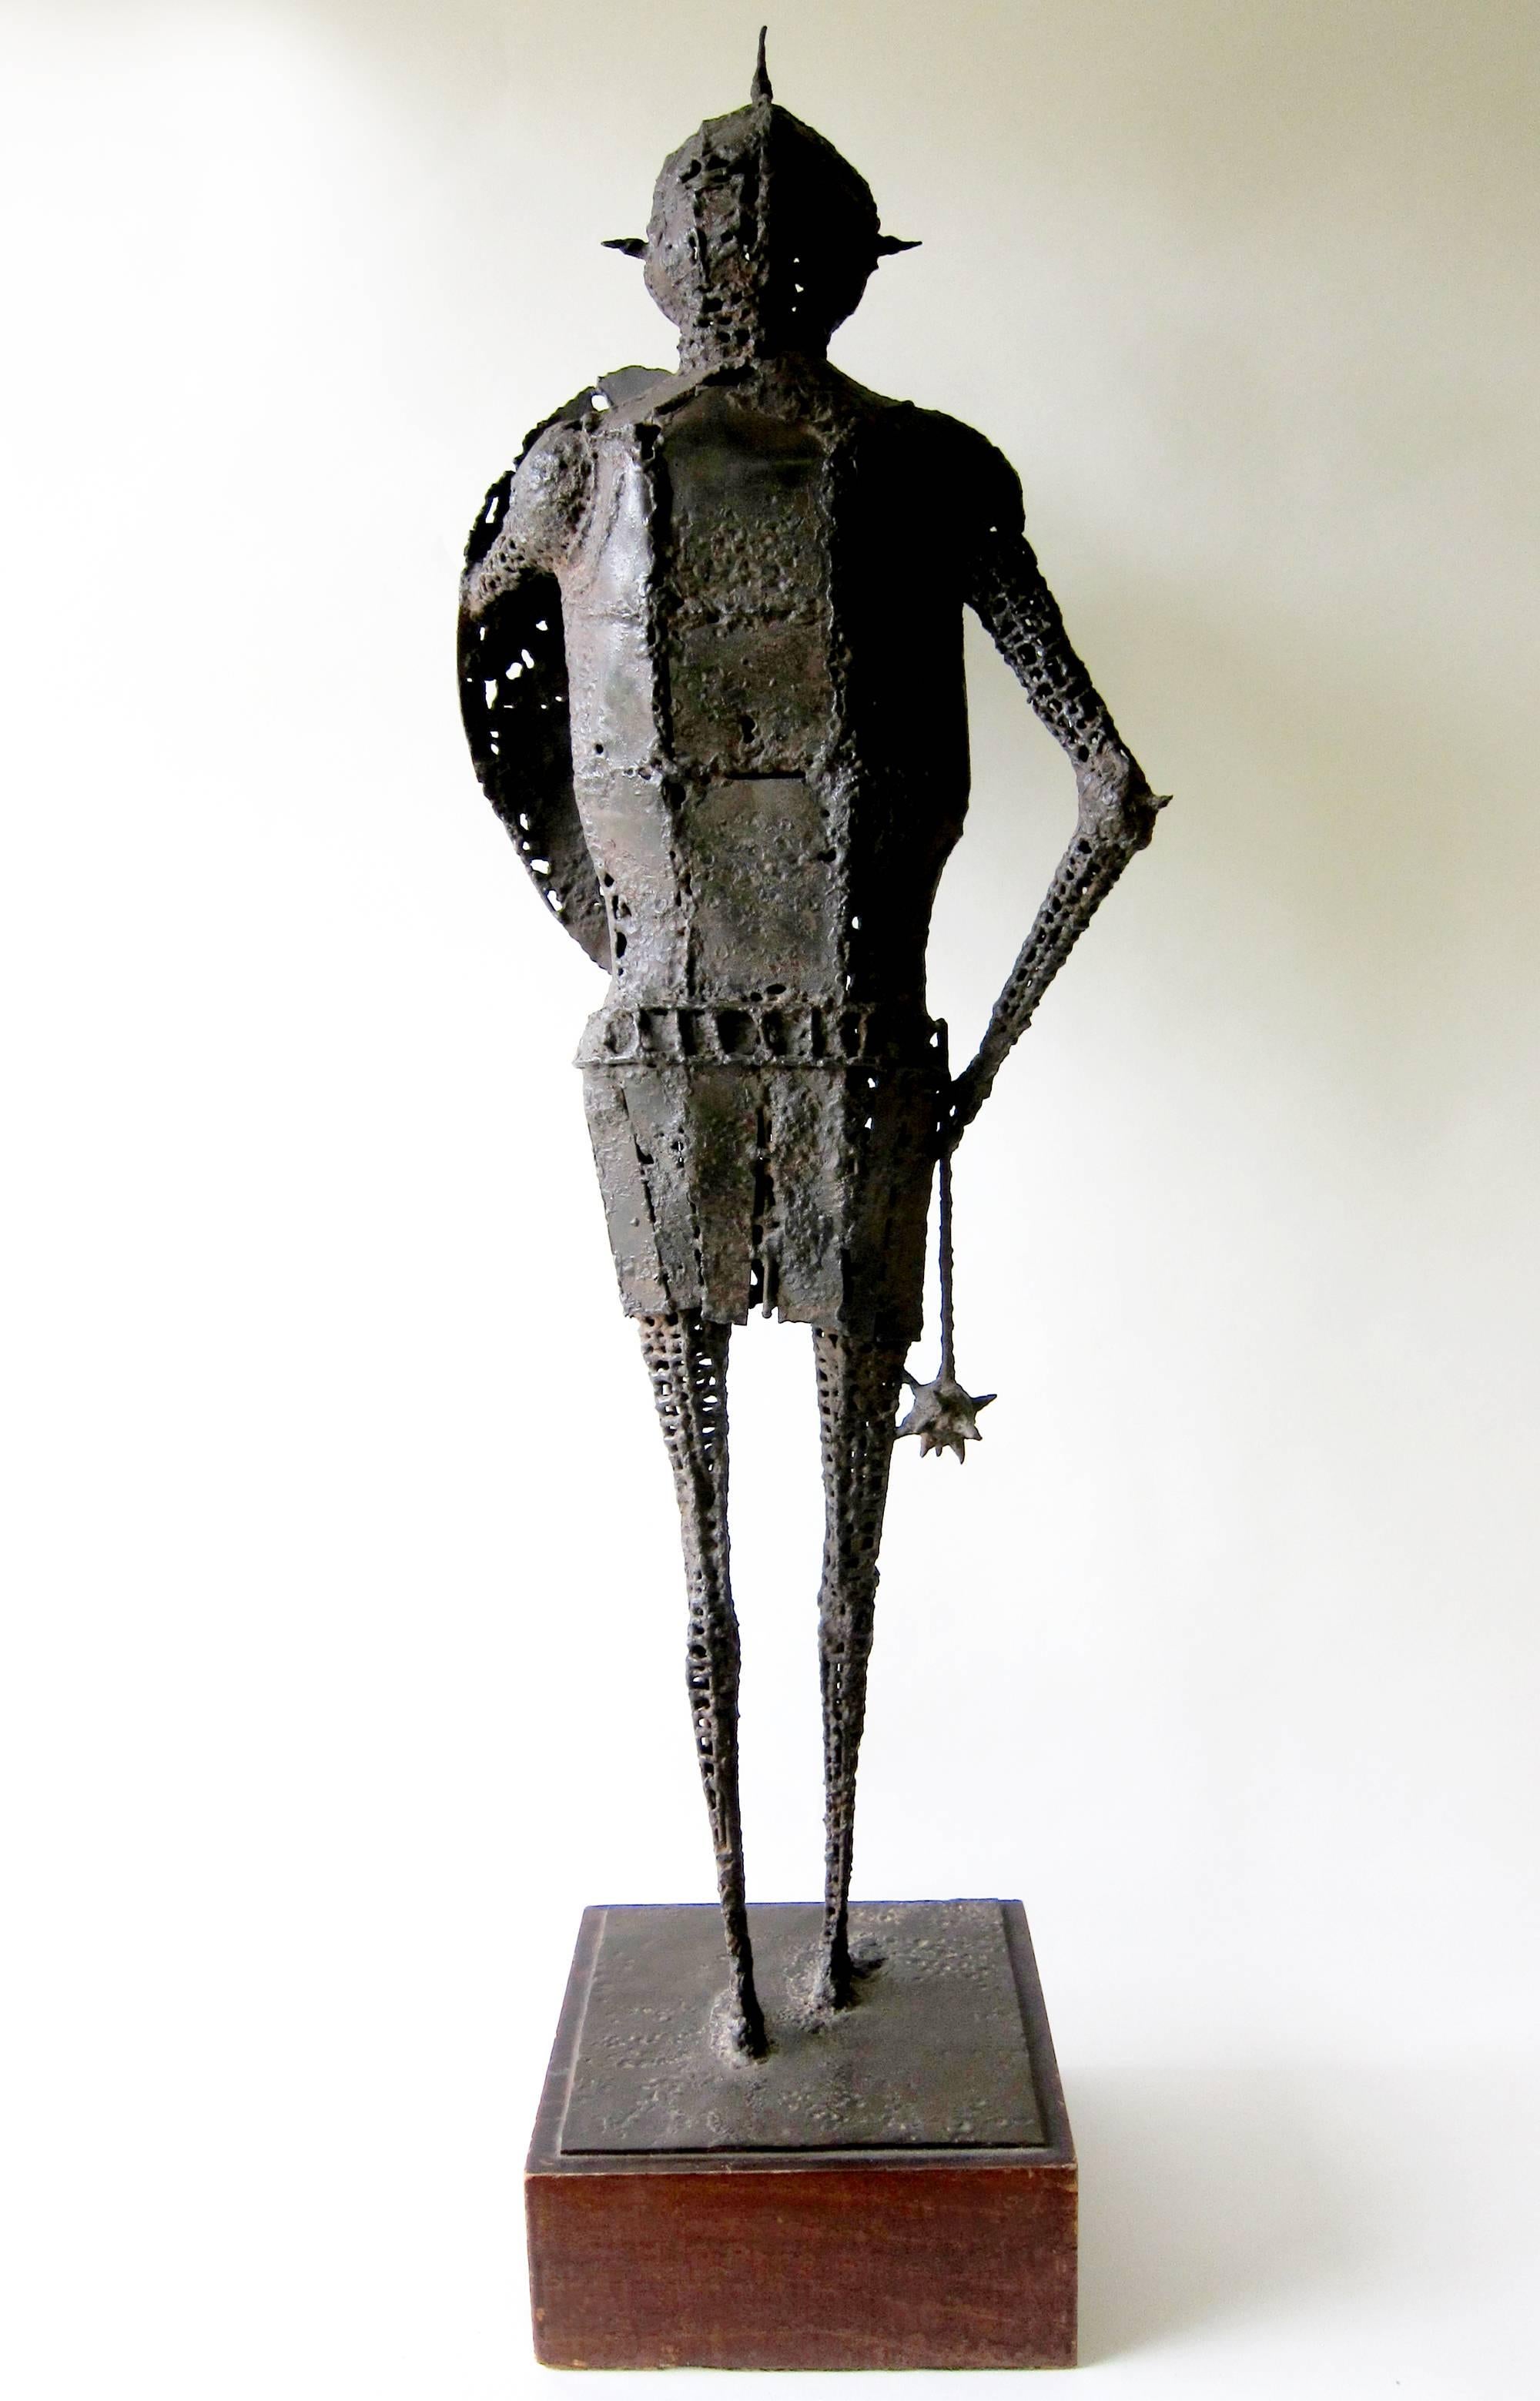 Unique and intricate medieval knight sculpture with flail created by listed artist James Wines of New York. Sculpture was made earlier in his career and dates from the 1950's. Its overall measurement is 40